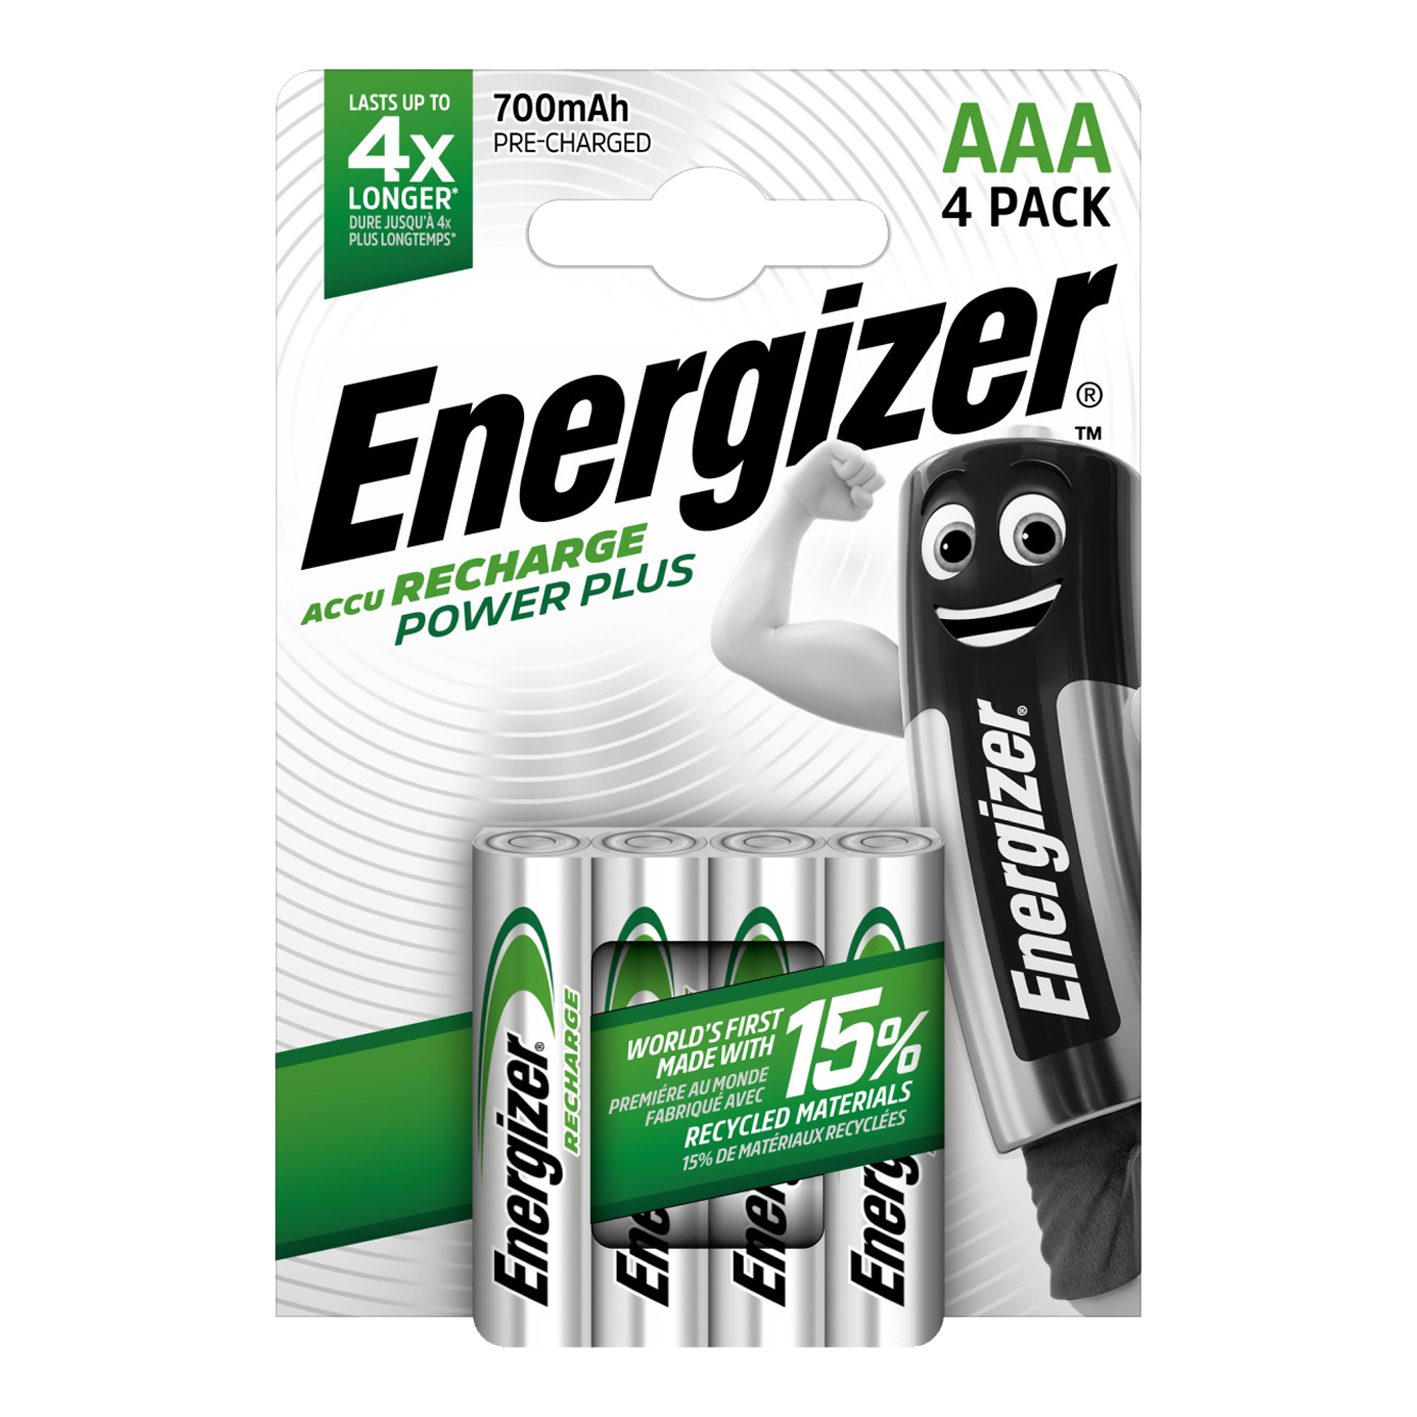 Energizer AAA 700mAh Recharge Power Plus, Pack of 4